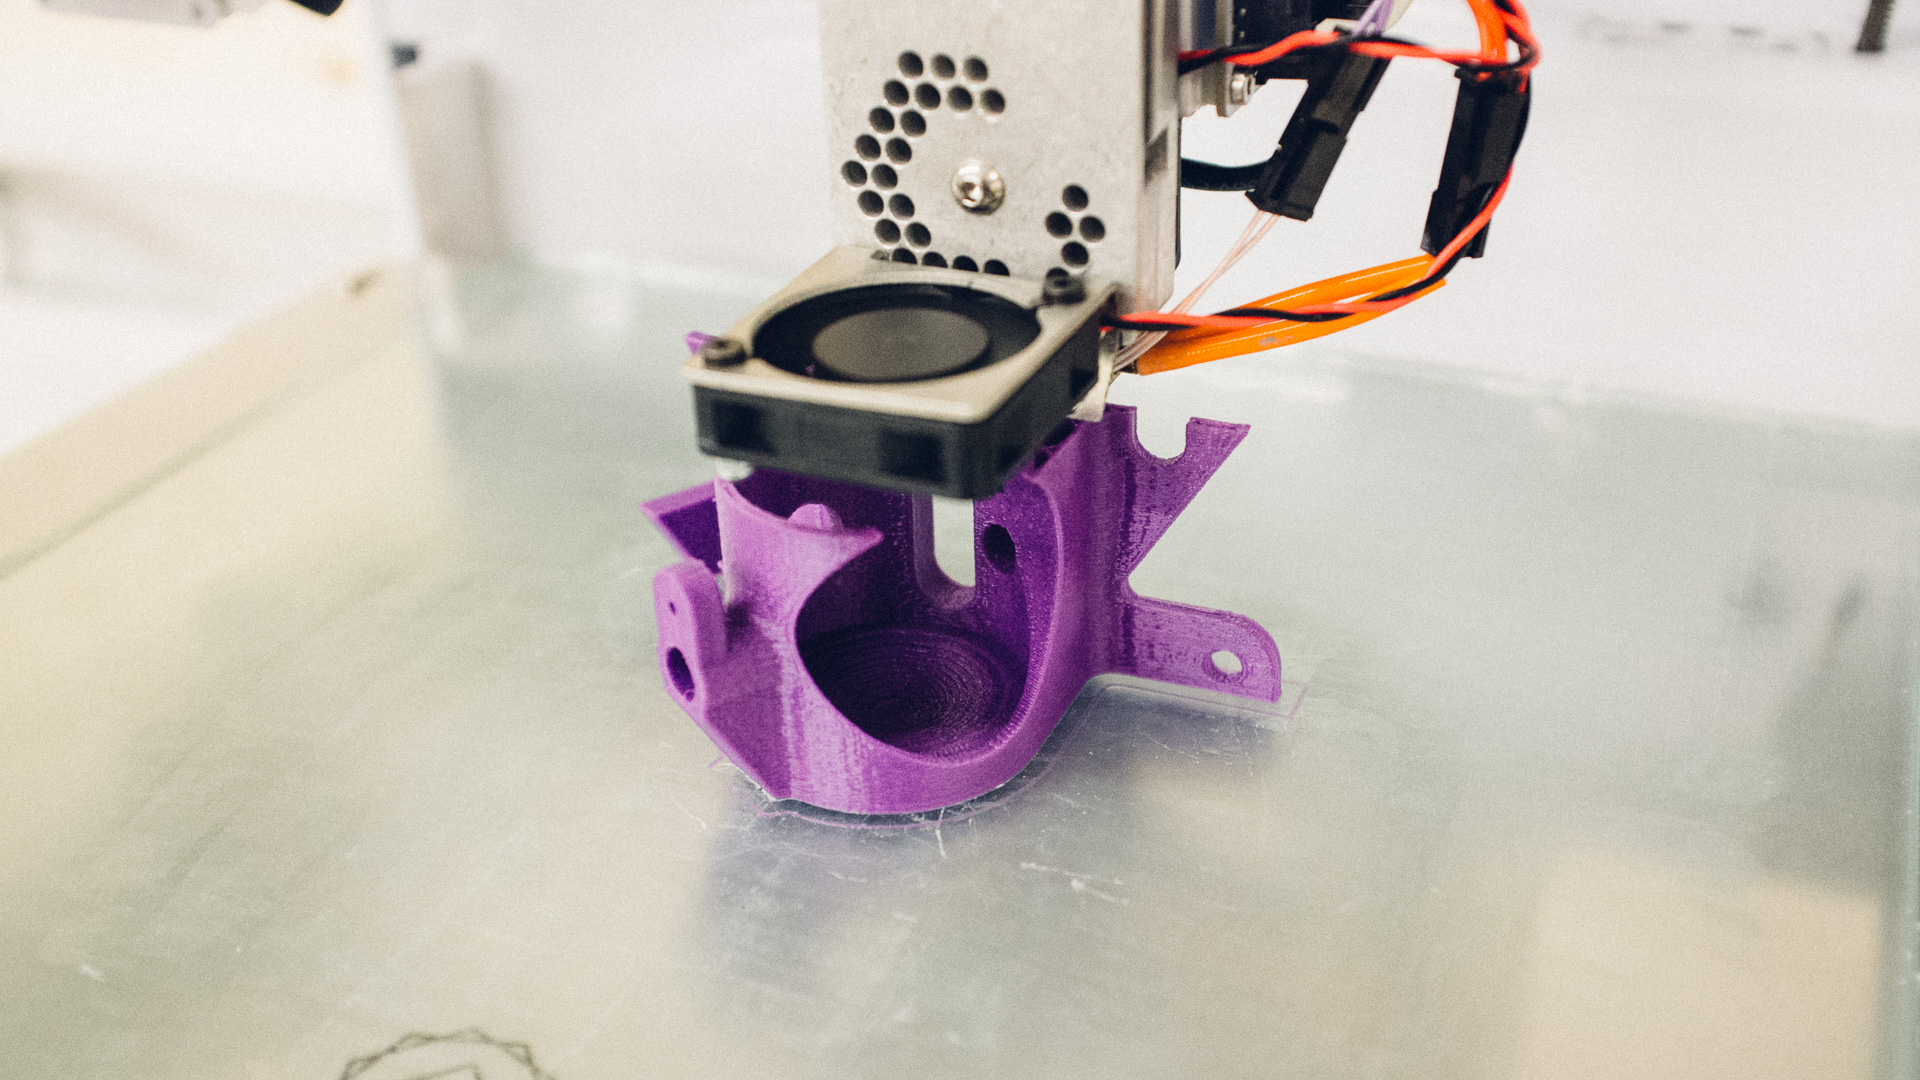 3D-printing the final revision of the dispenser